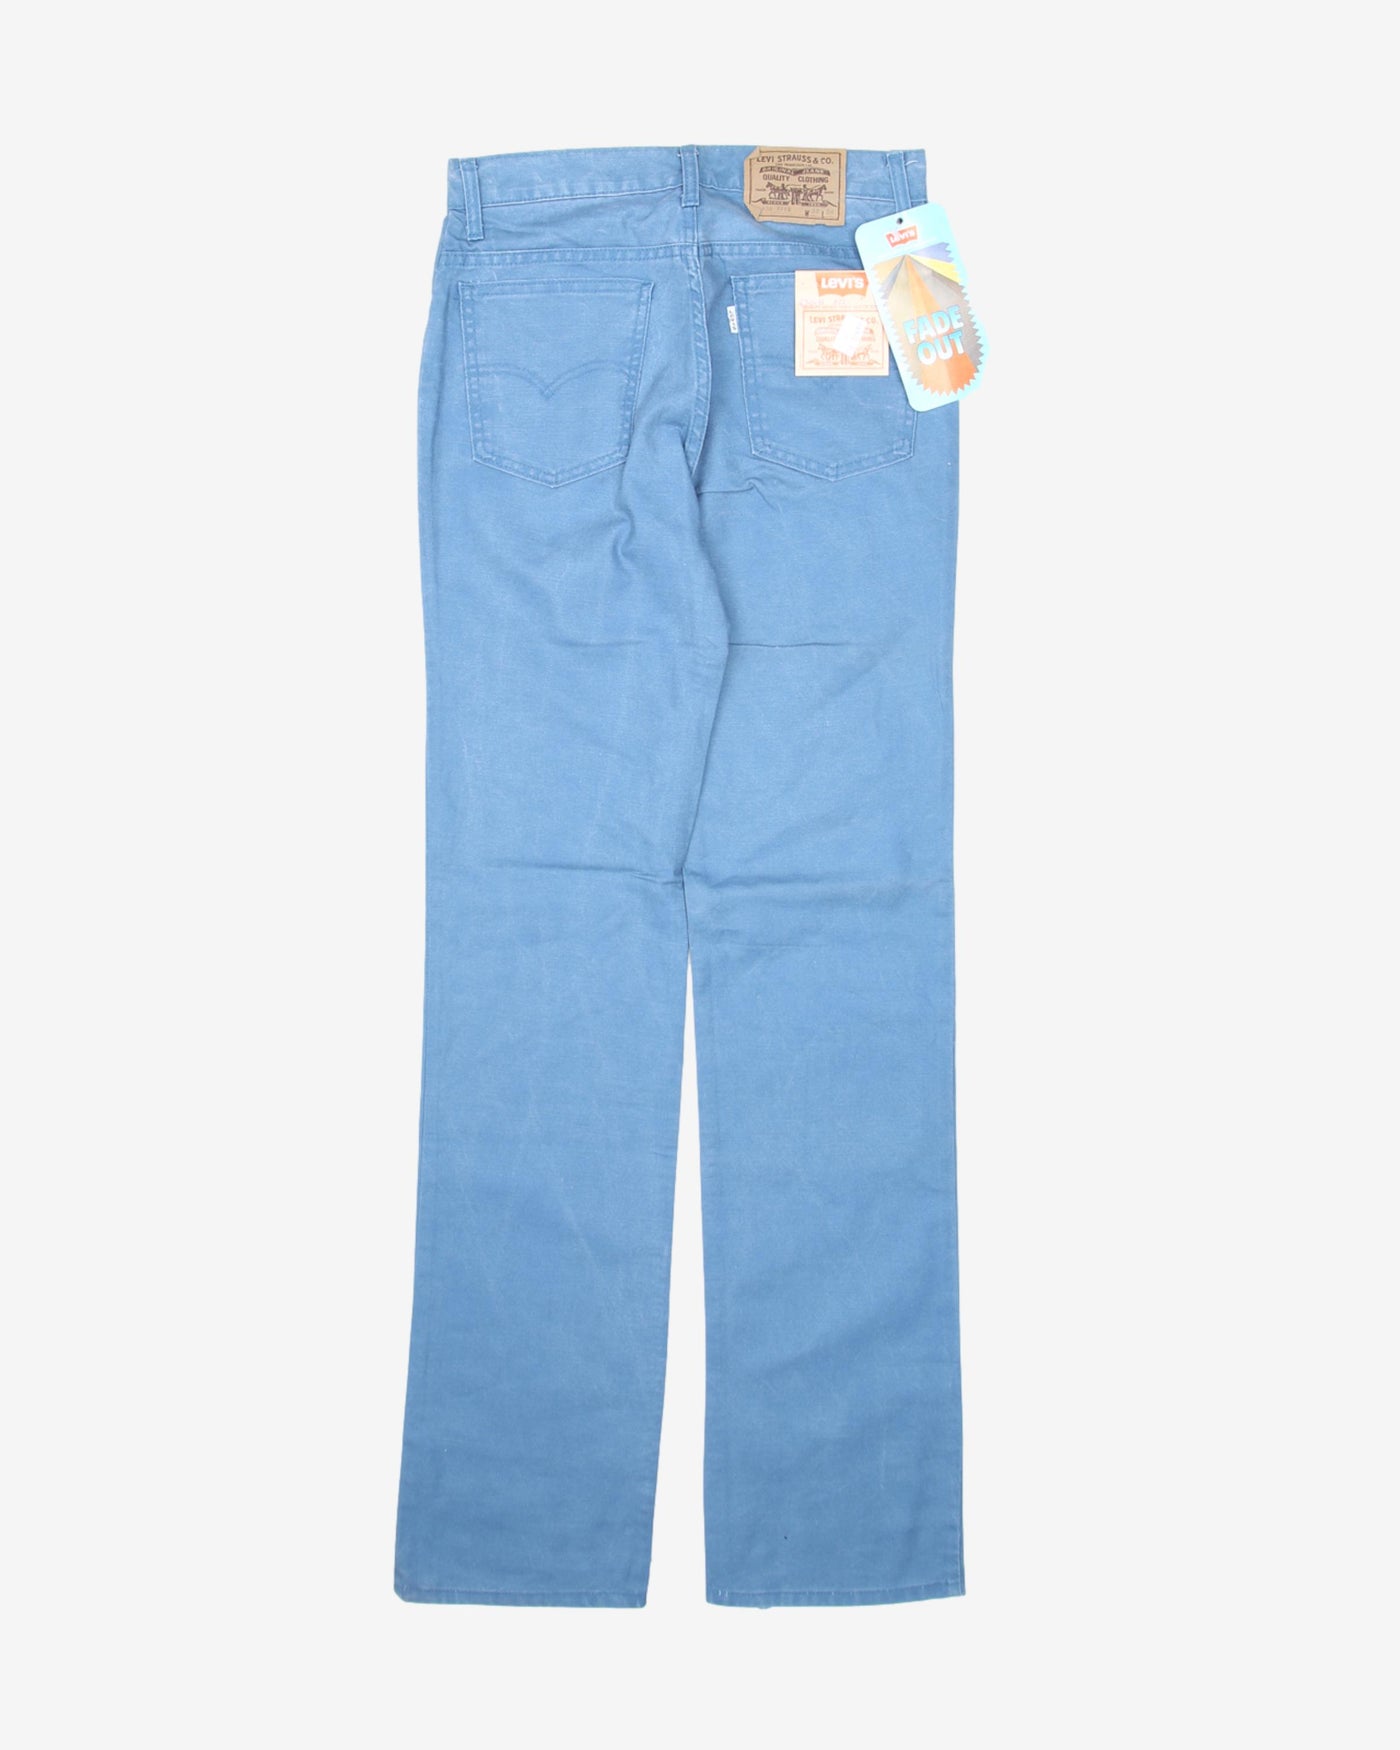 Vintage1980 Levi's Deadstock With Tags Blue Trousers / Jeans - W30 L36